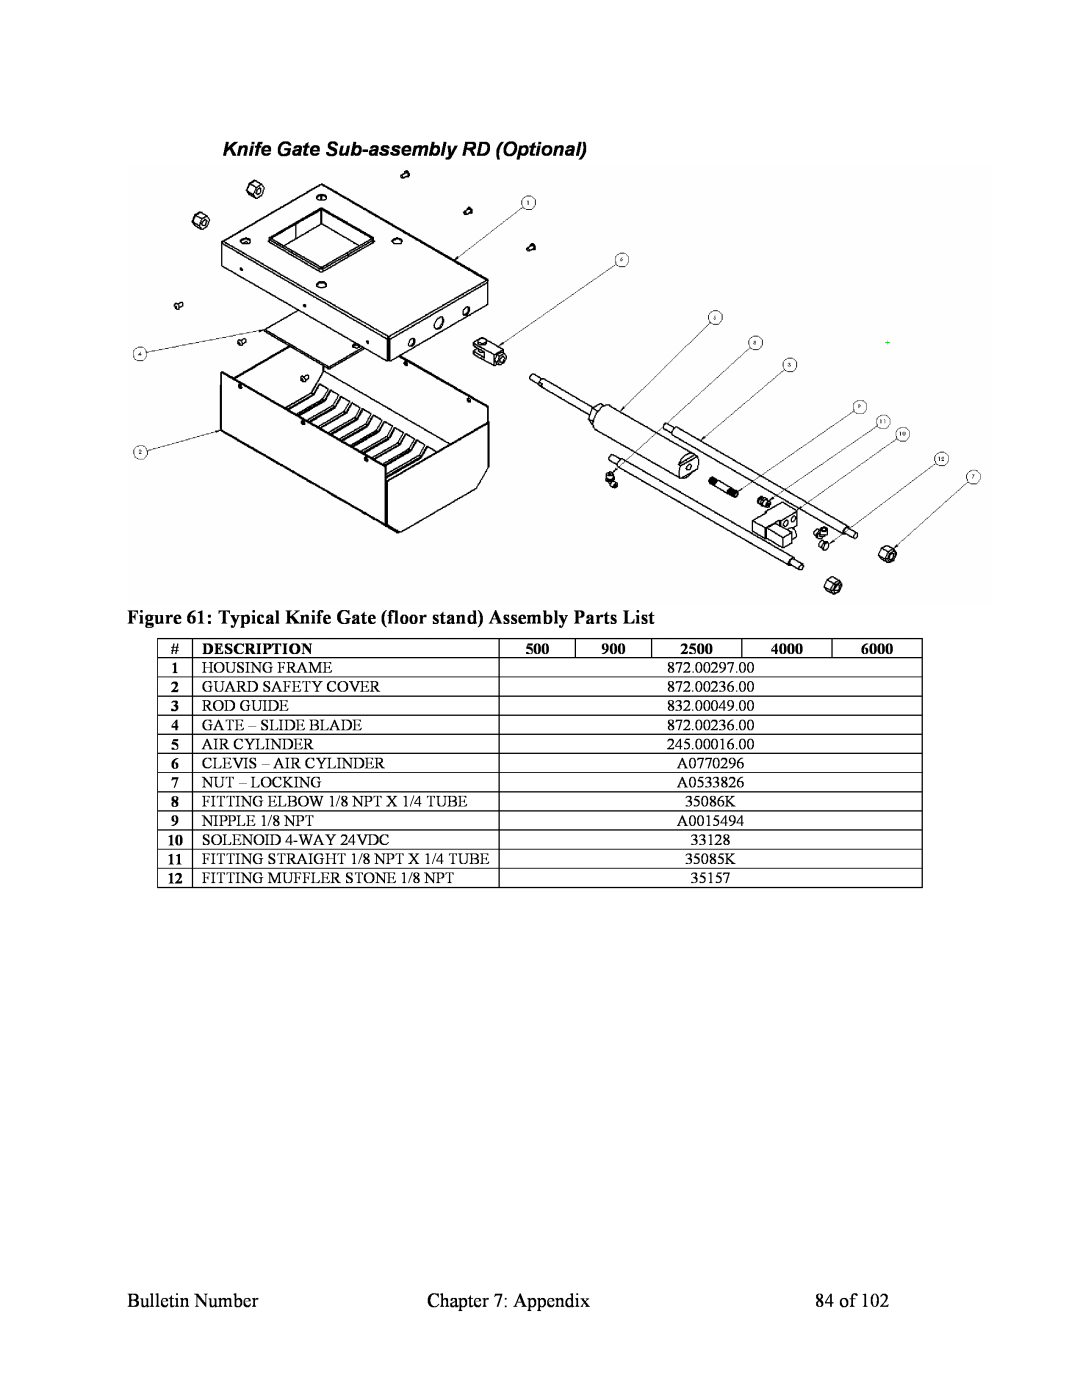 Mitsubishi Electronics 882.00207.00 specifications Knife Gate Sub-assemblyRD Optional, Bulletin Number, Appendix, 84 of 